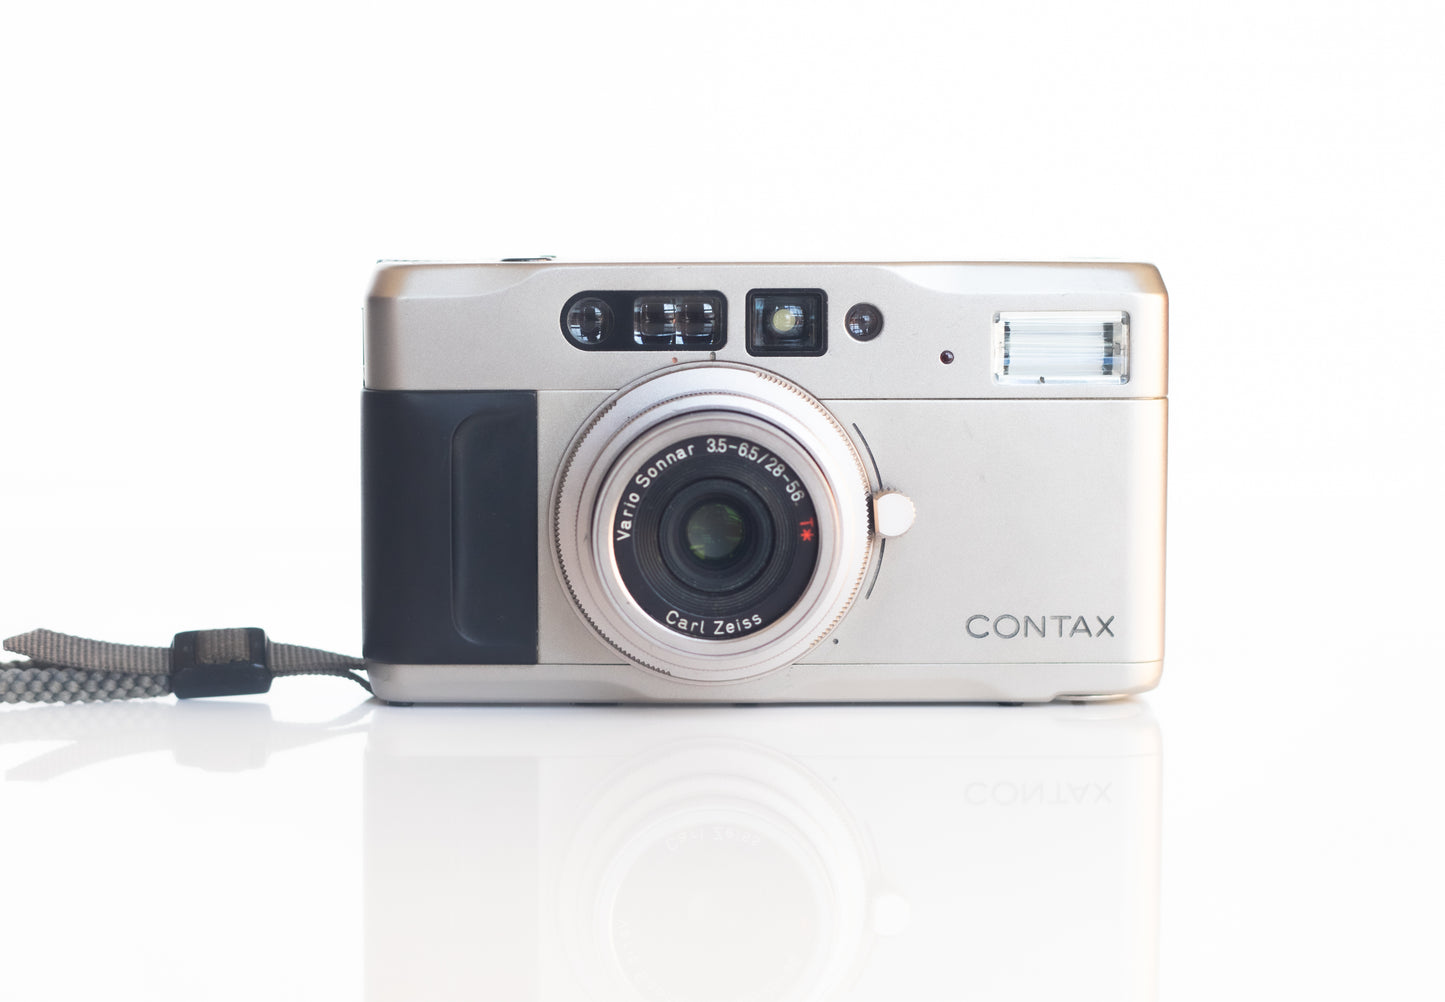 Contax TVS High End Point & Shoot |  Sample Images | F3.5 Carl Zeiss T* Lens | Mint